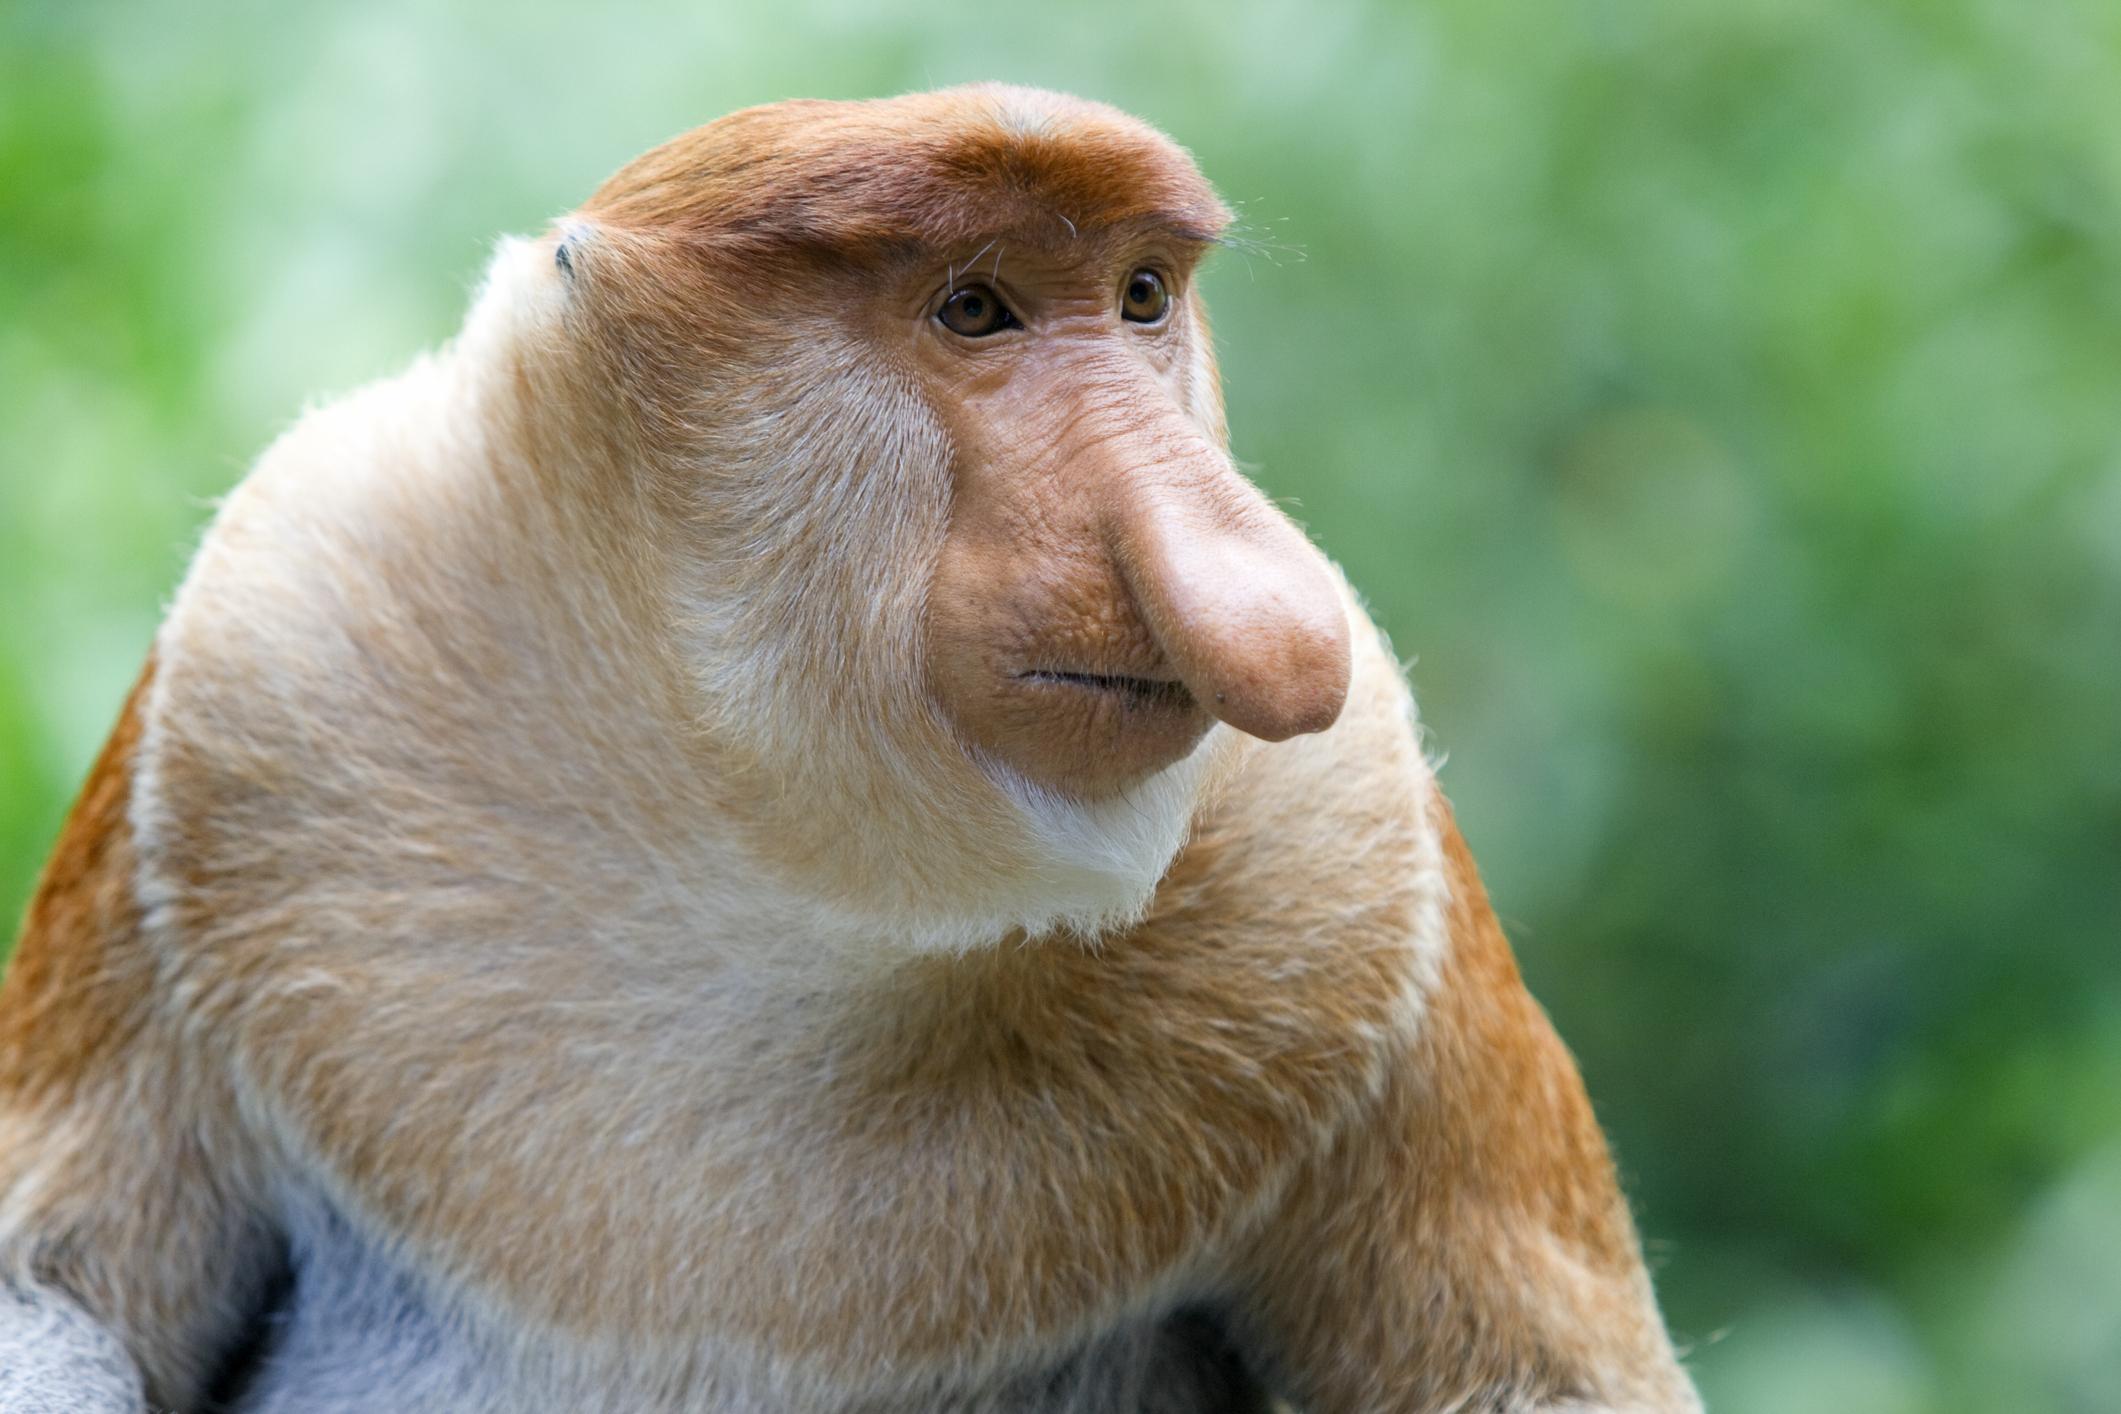 New monkey discovered